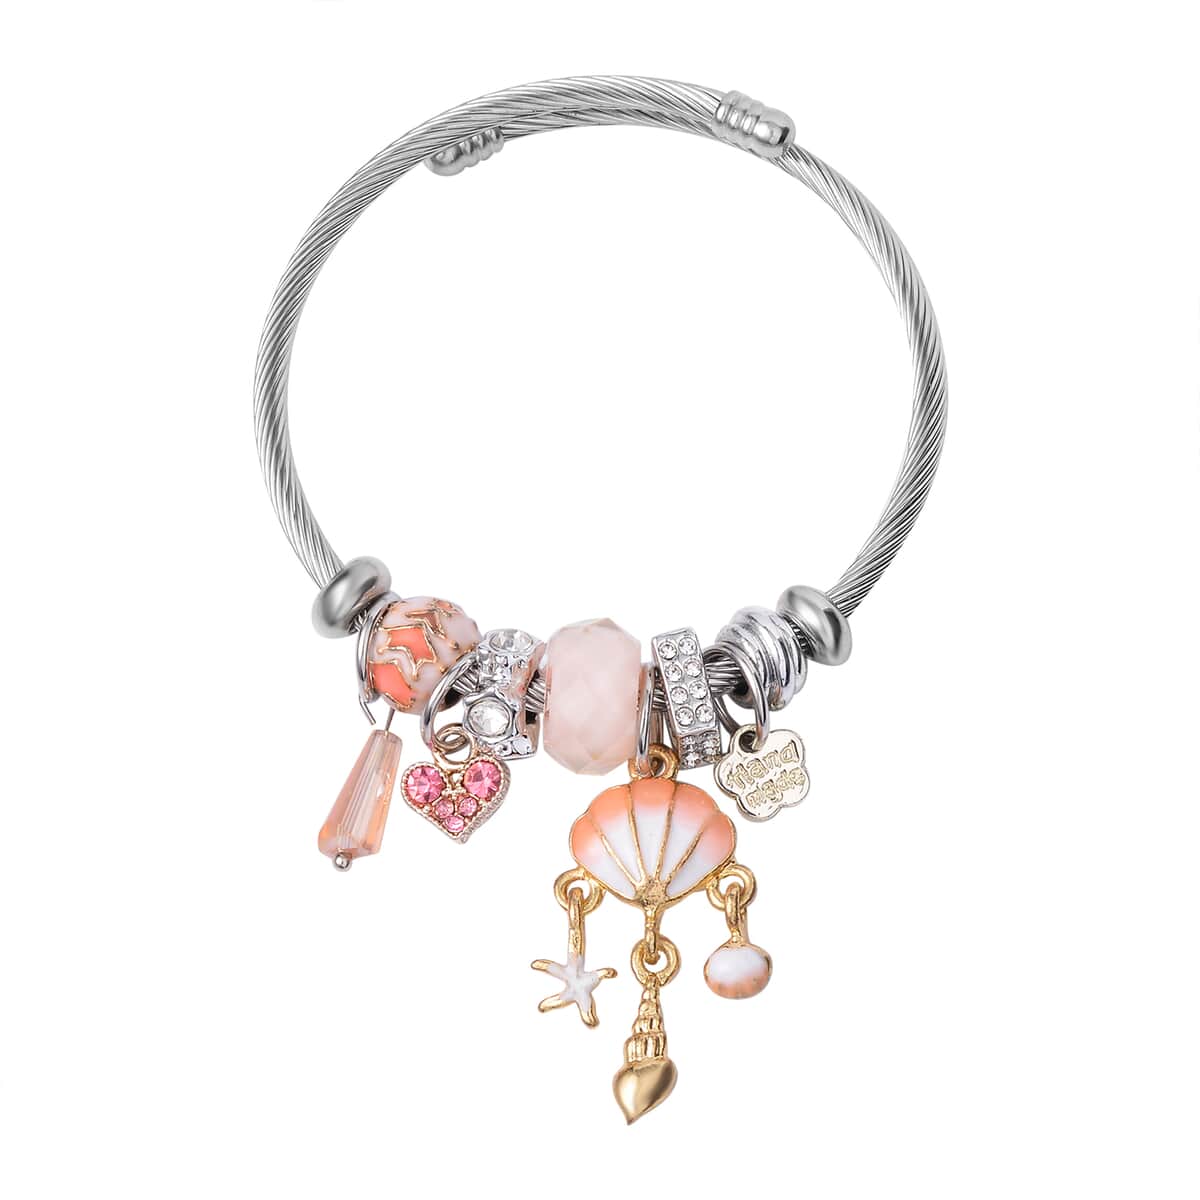 Set of 2 Resin, Pink Glass, Pink and White Austrian Crystal Charm Bracelet in Silvertone & Goldtone (6.5-7.0In) image number 2